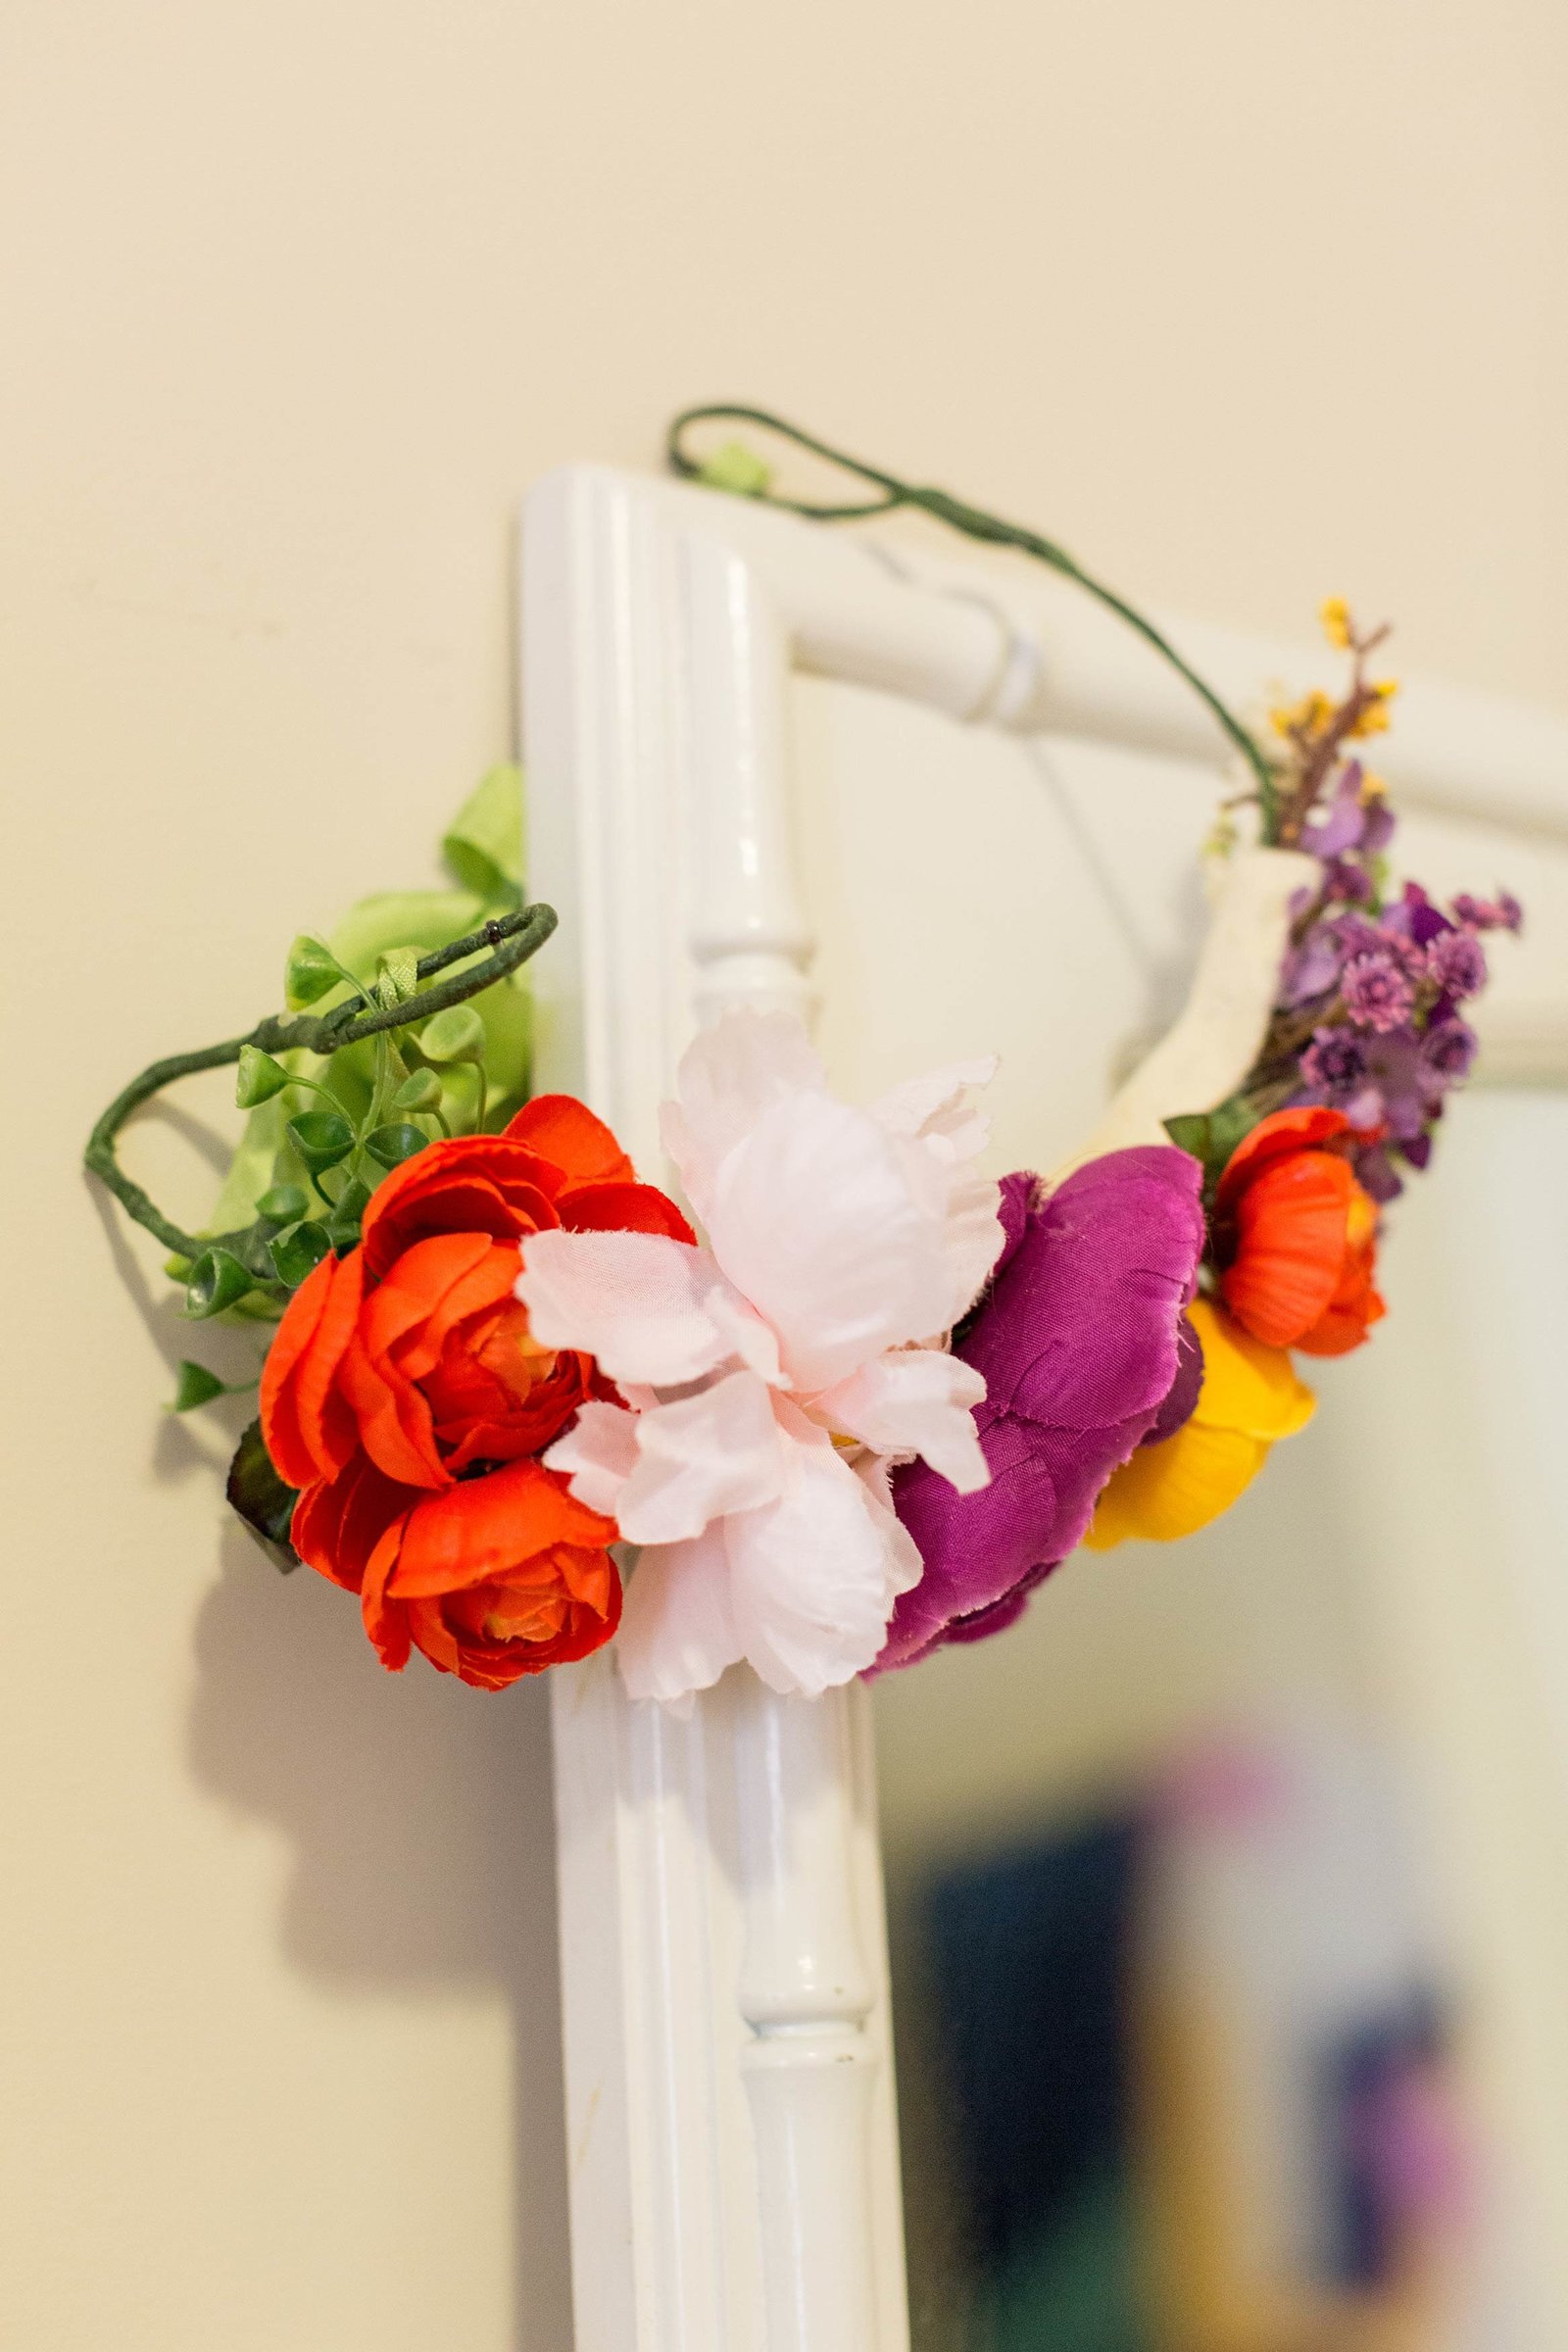 A bright flower crown hangs on the corner of a mirror.